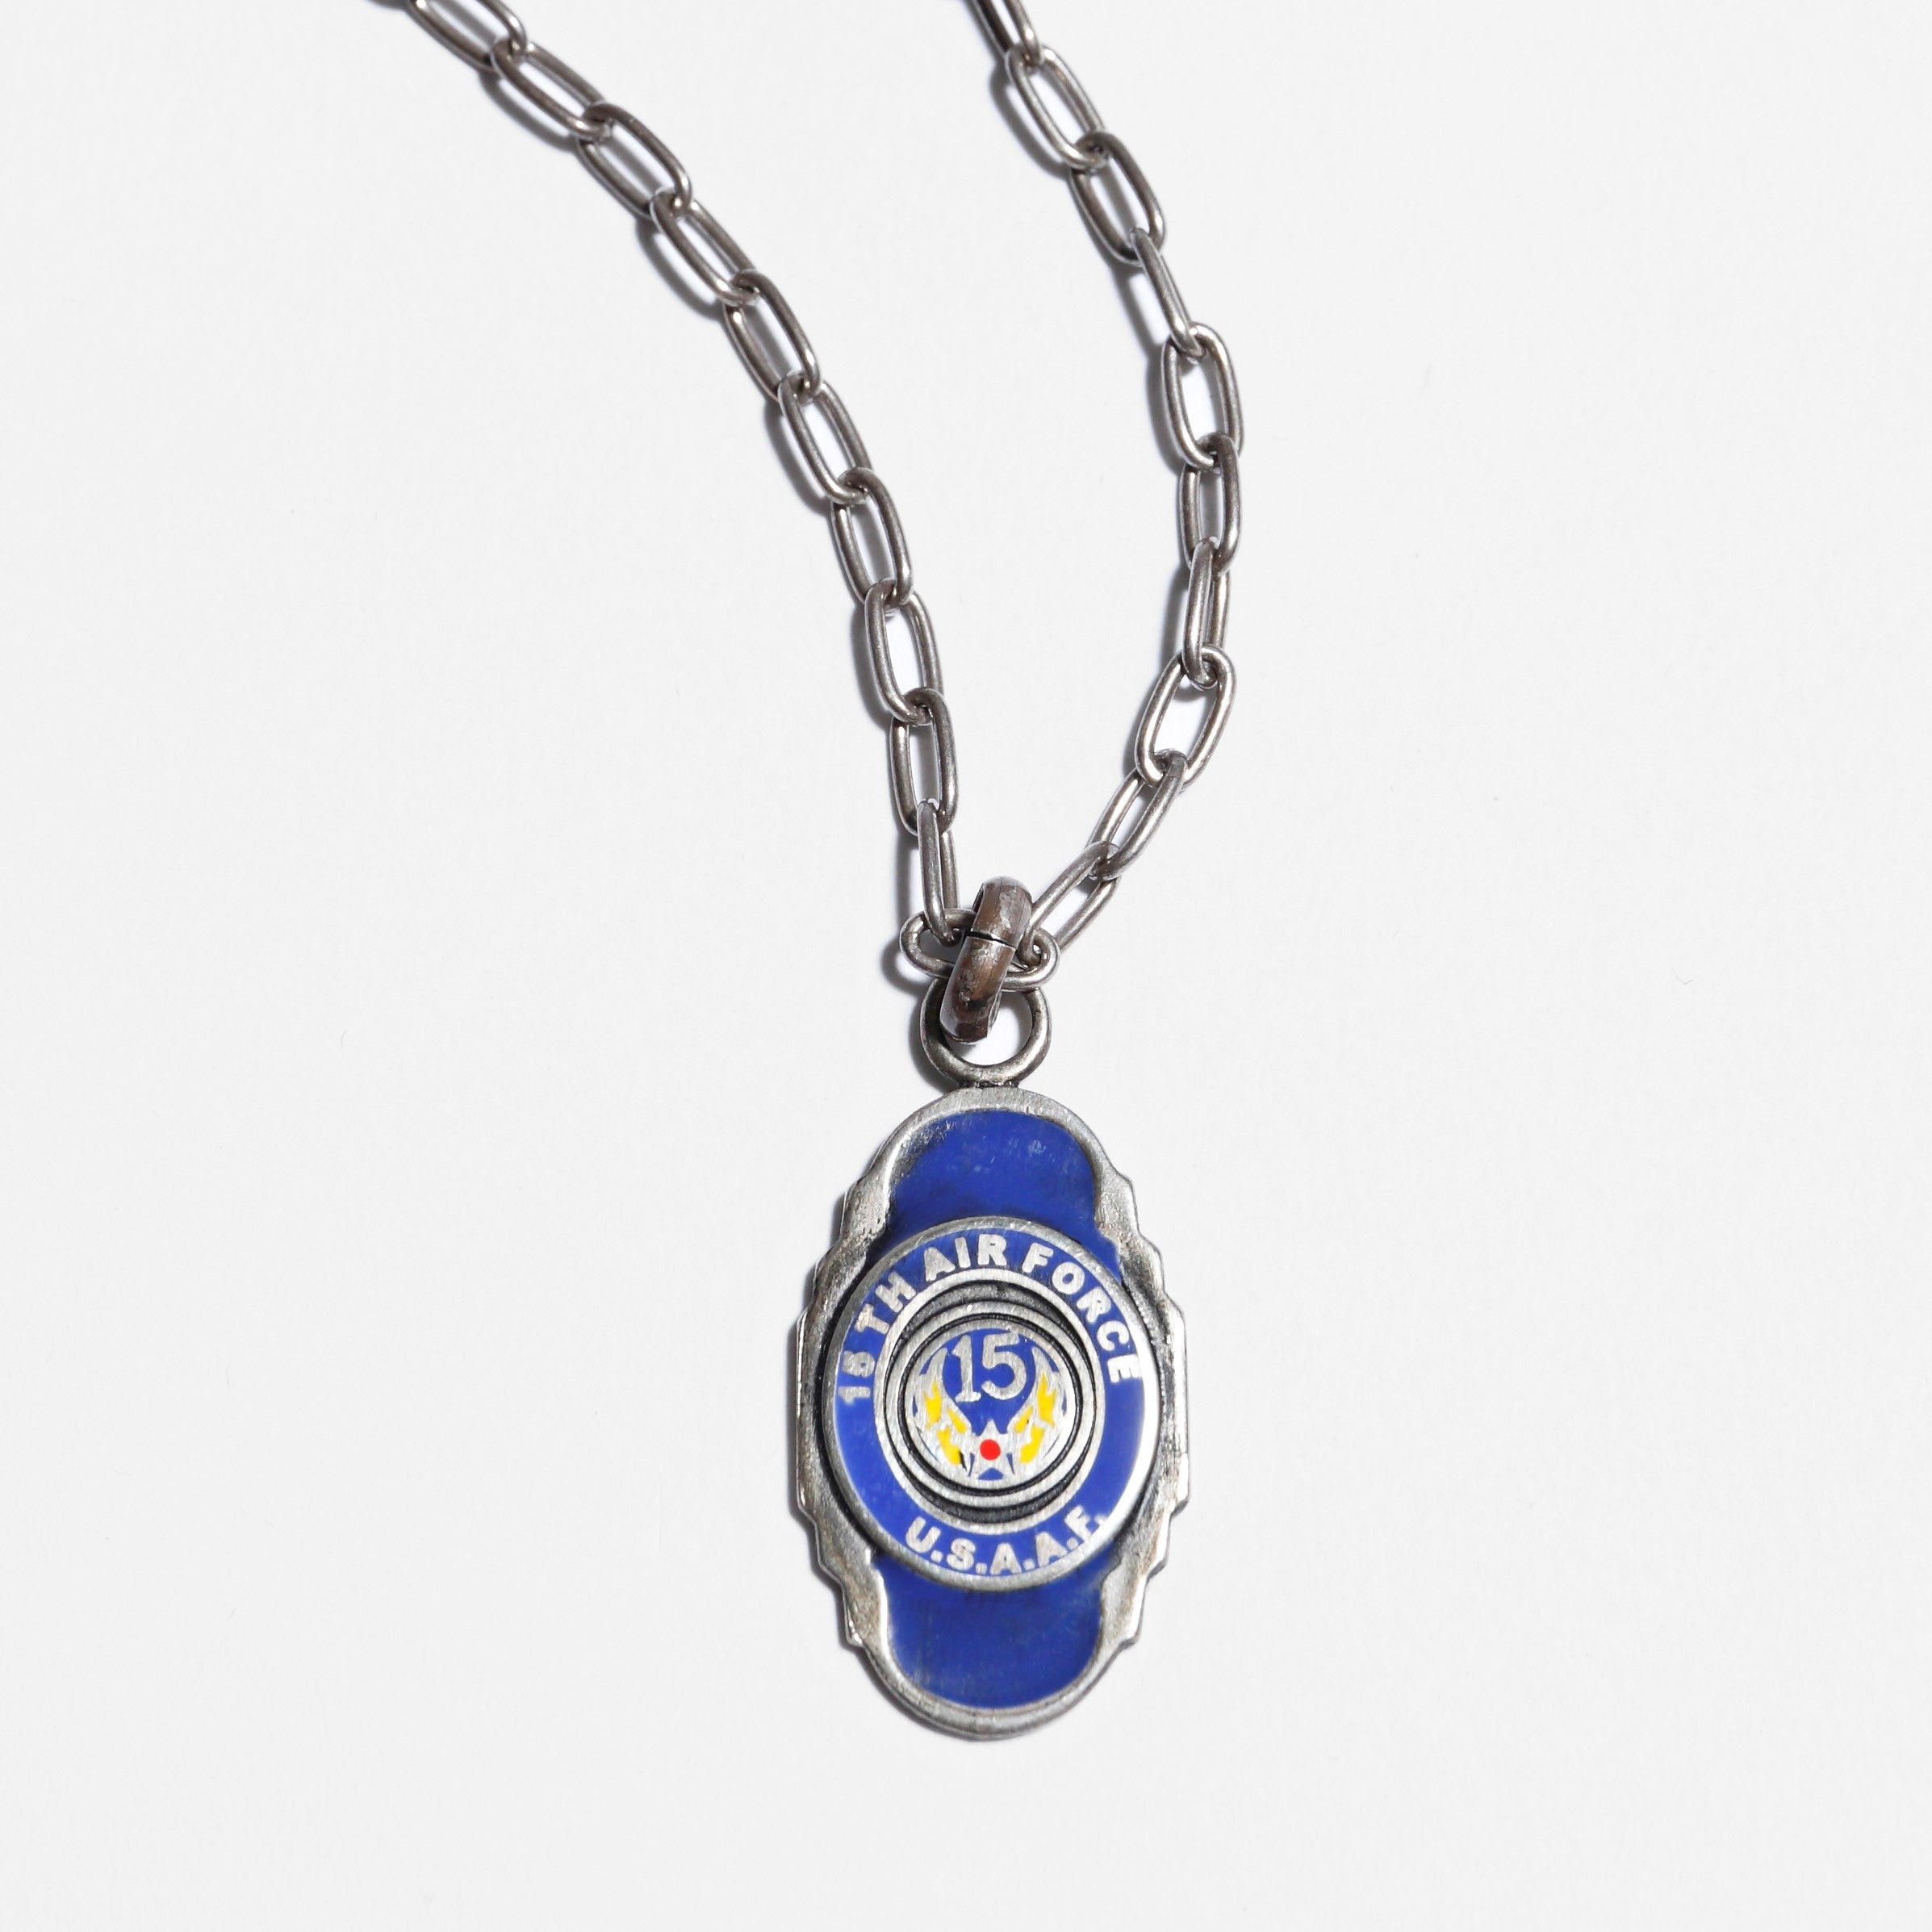 15TH AIR FORCE PENDANT